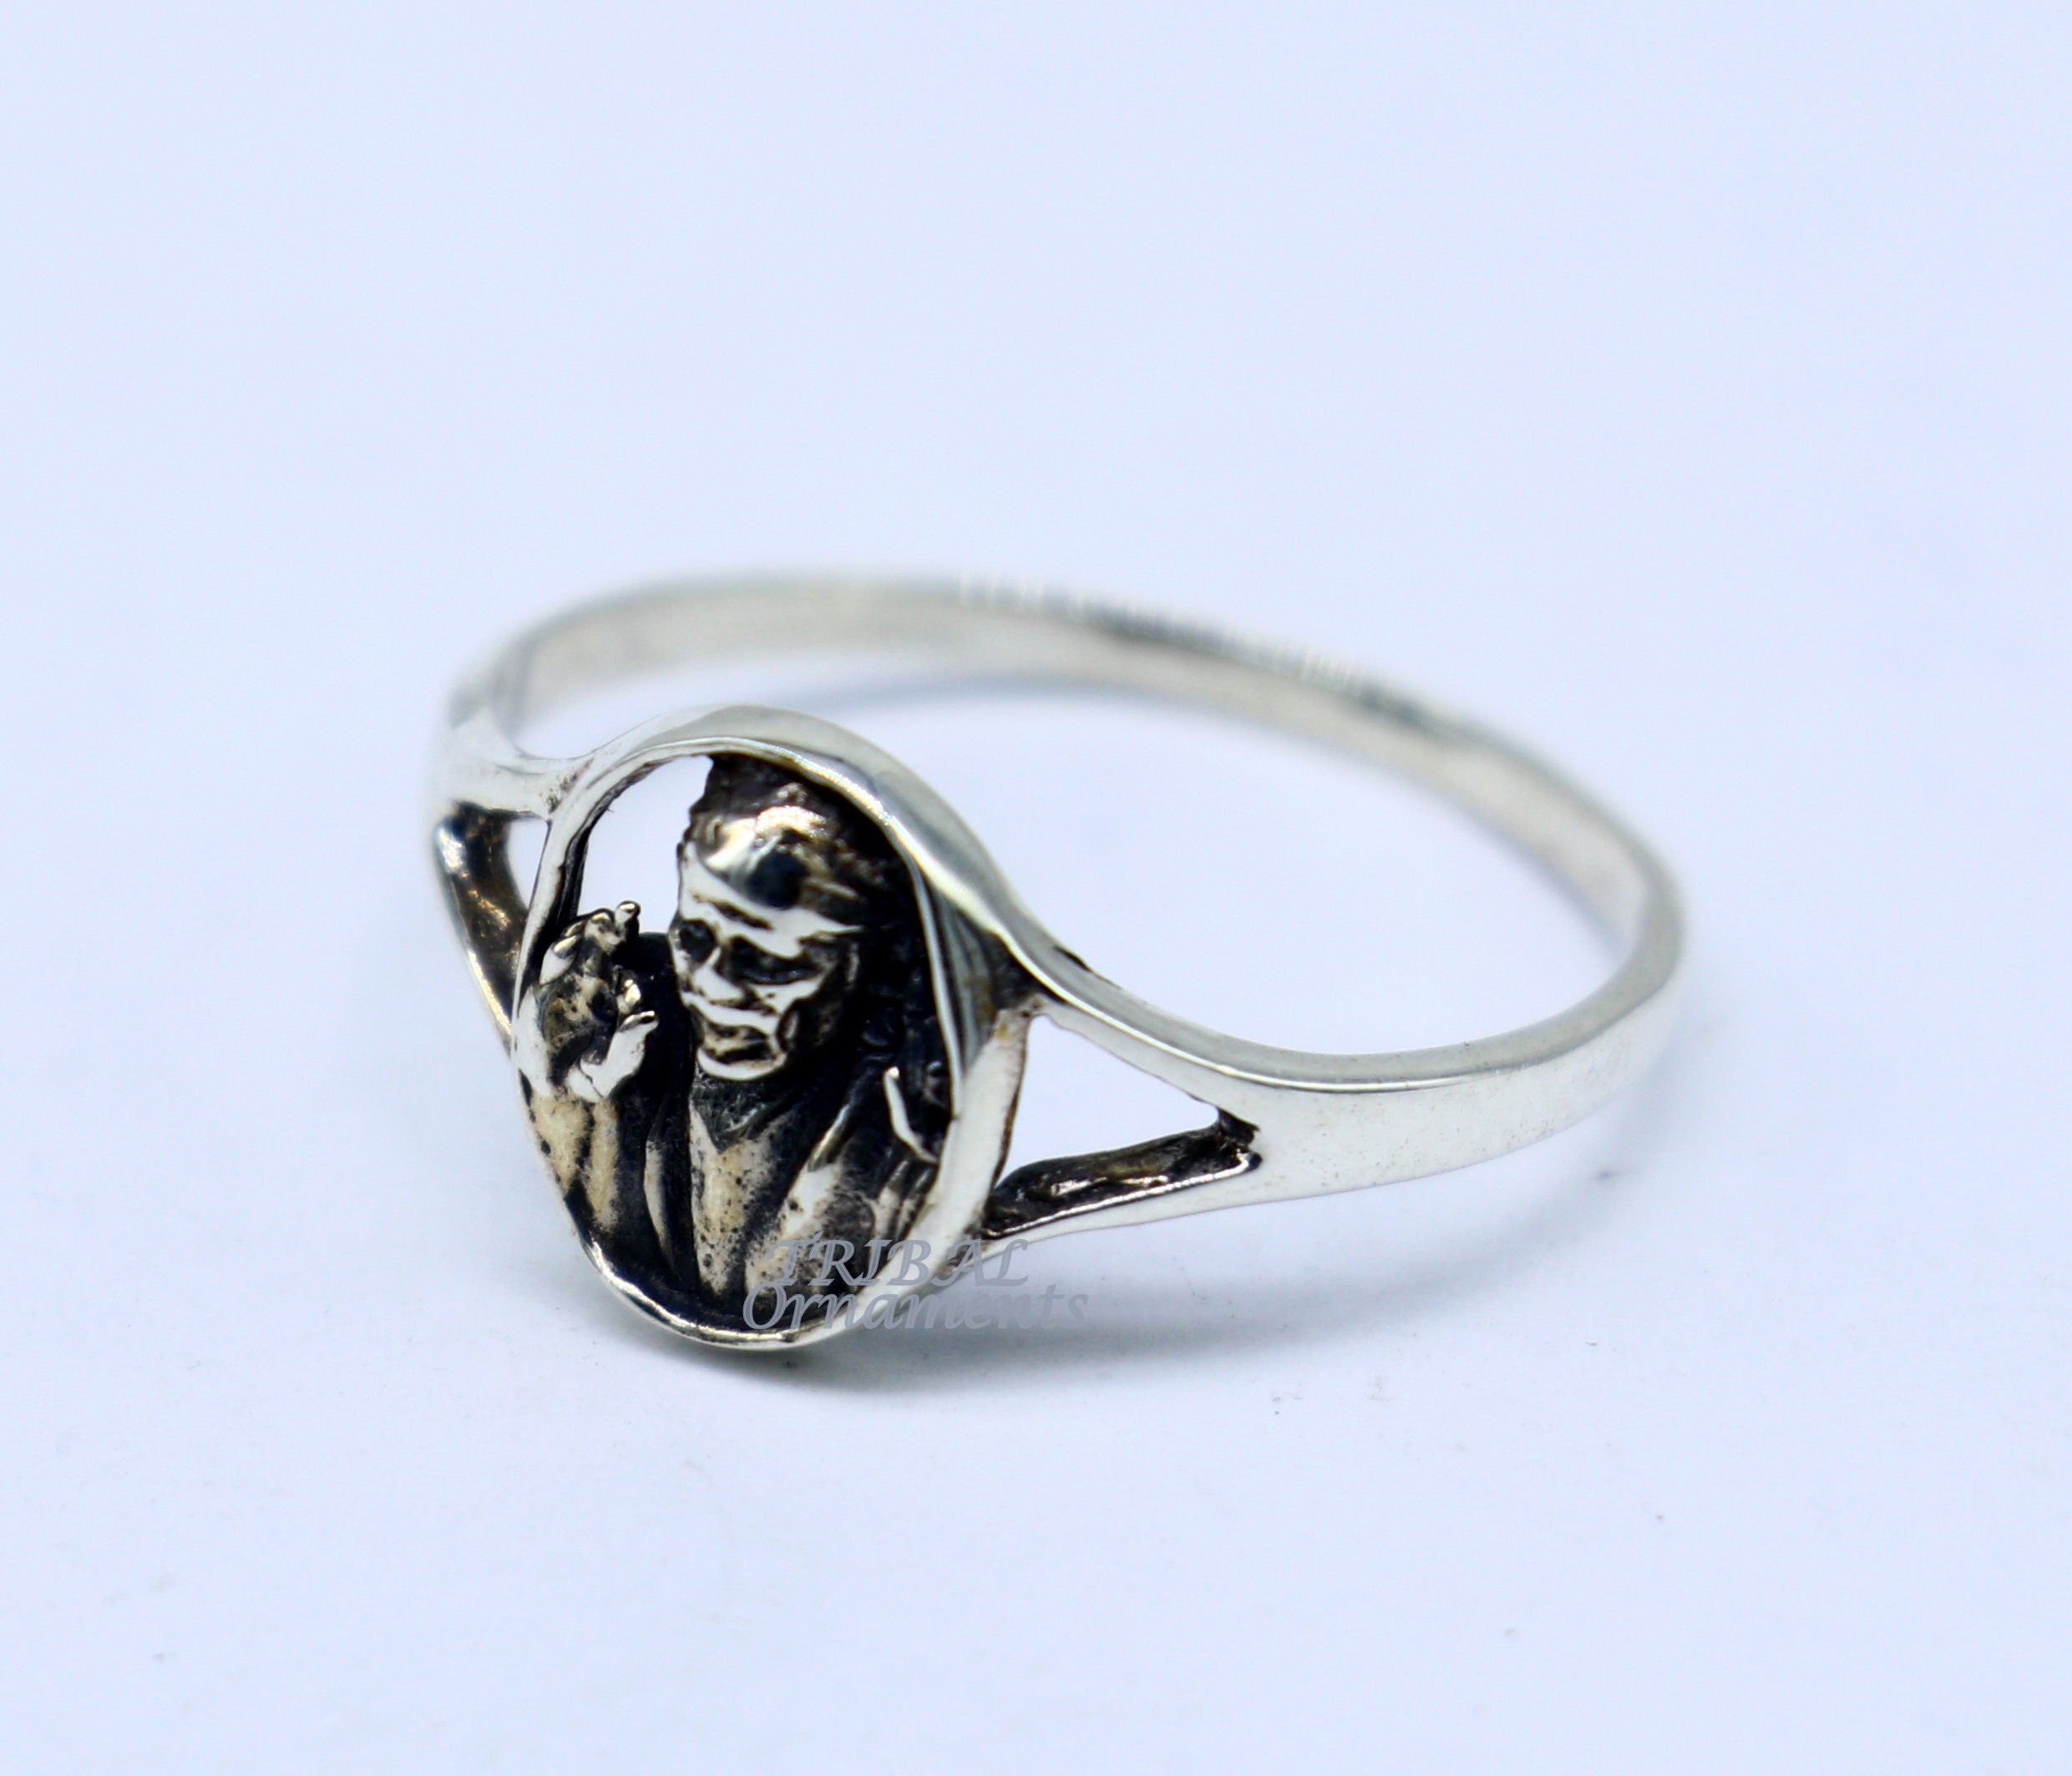 Sai Baba Ring in Pure Sterling Silver @ USA UK Canada